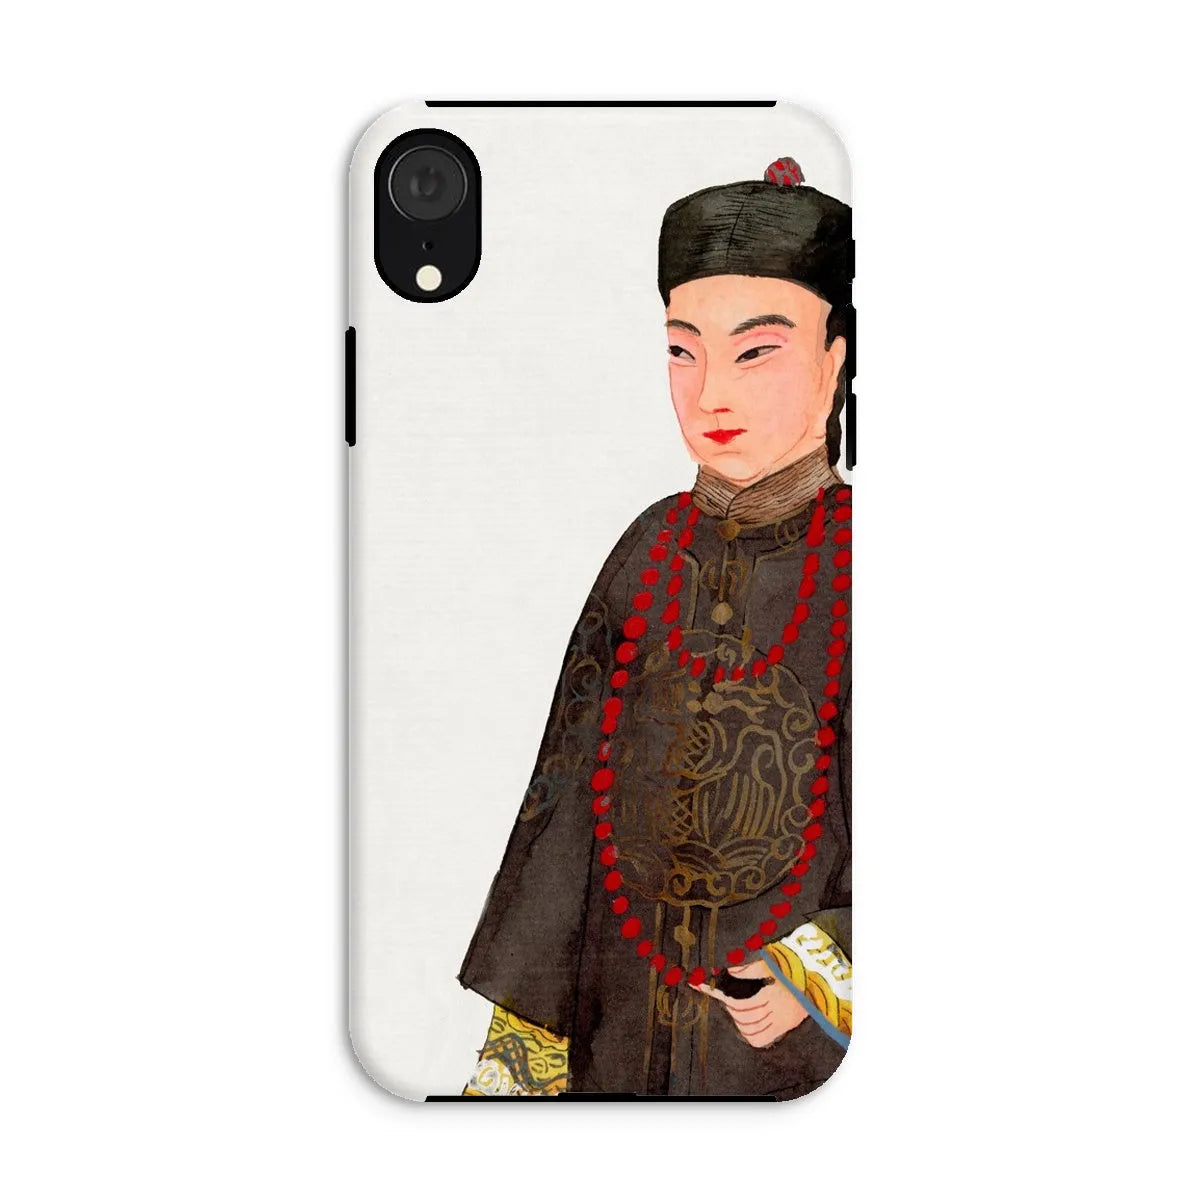 Emperor’s Courtier - Chinese Manchu Aesthetic Art Phone Case - Iphone Xr / Matte - Mobile Phone Cases - Aesthetic Art